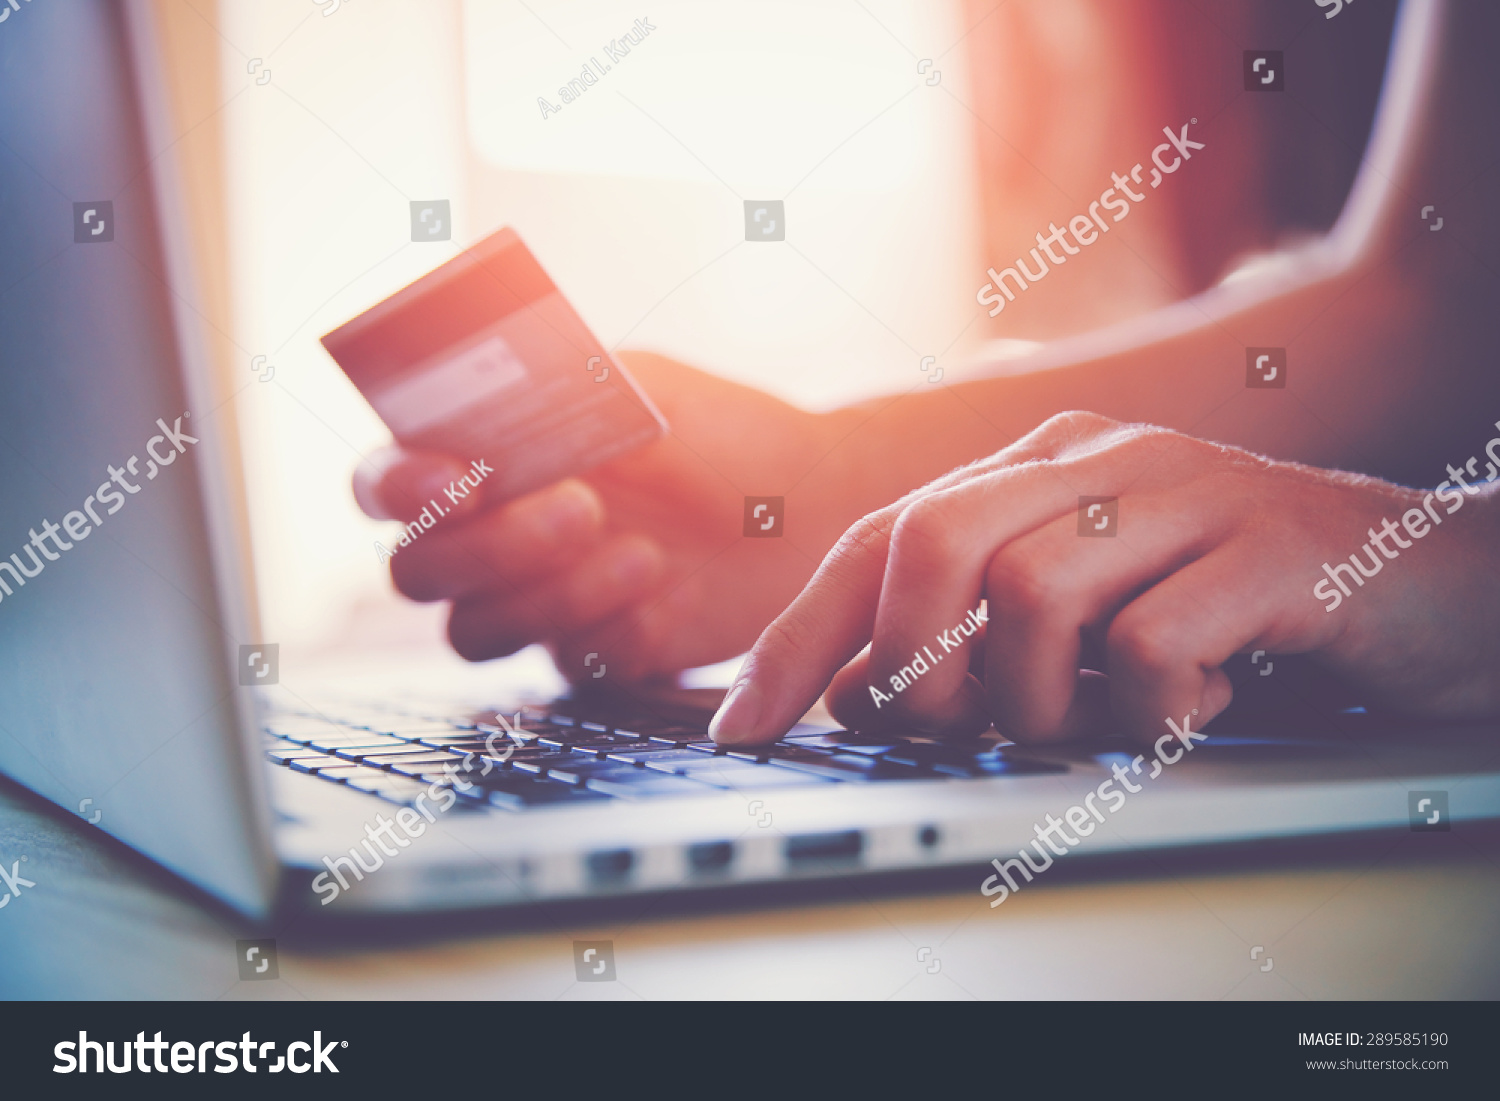 Hands holding credit card and using laptop. Online shopping #289585190